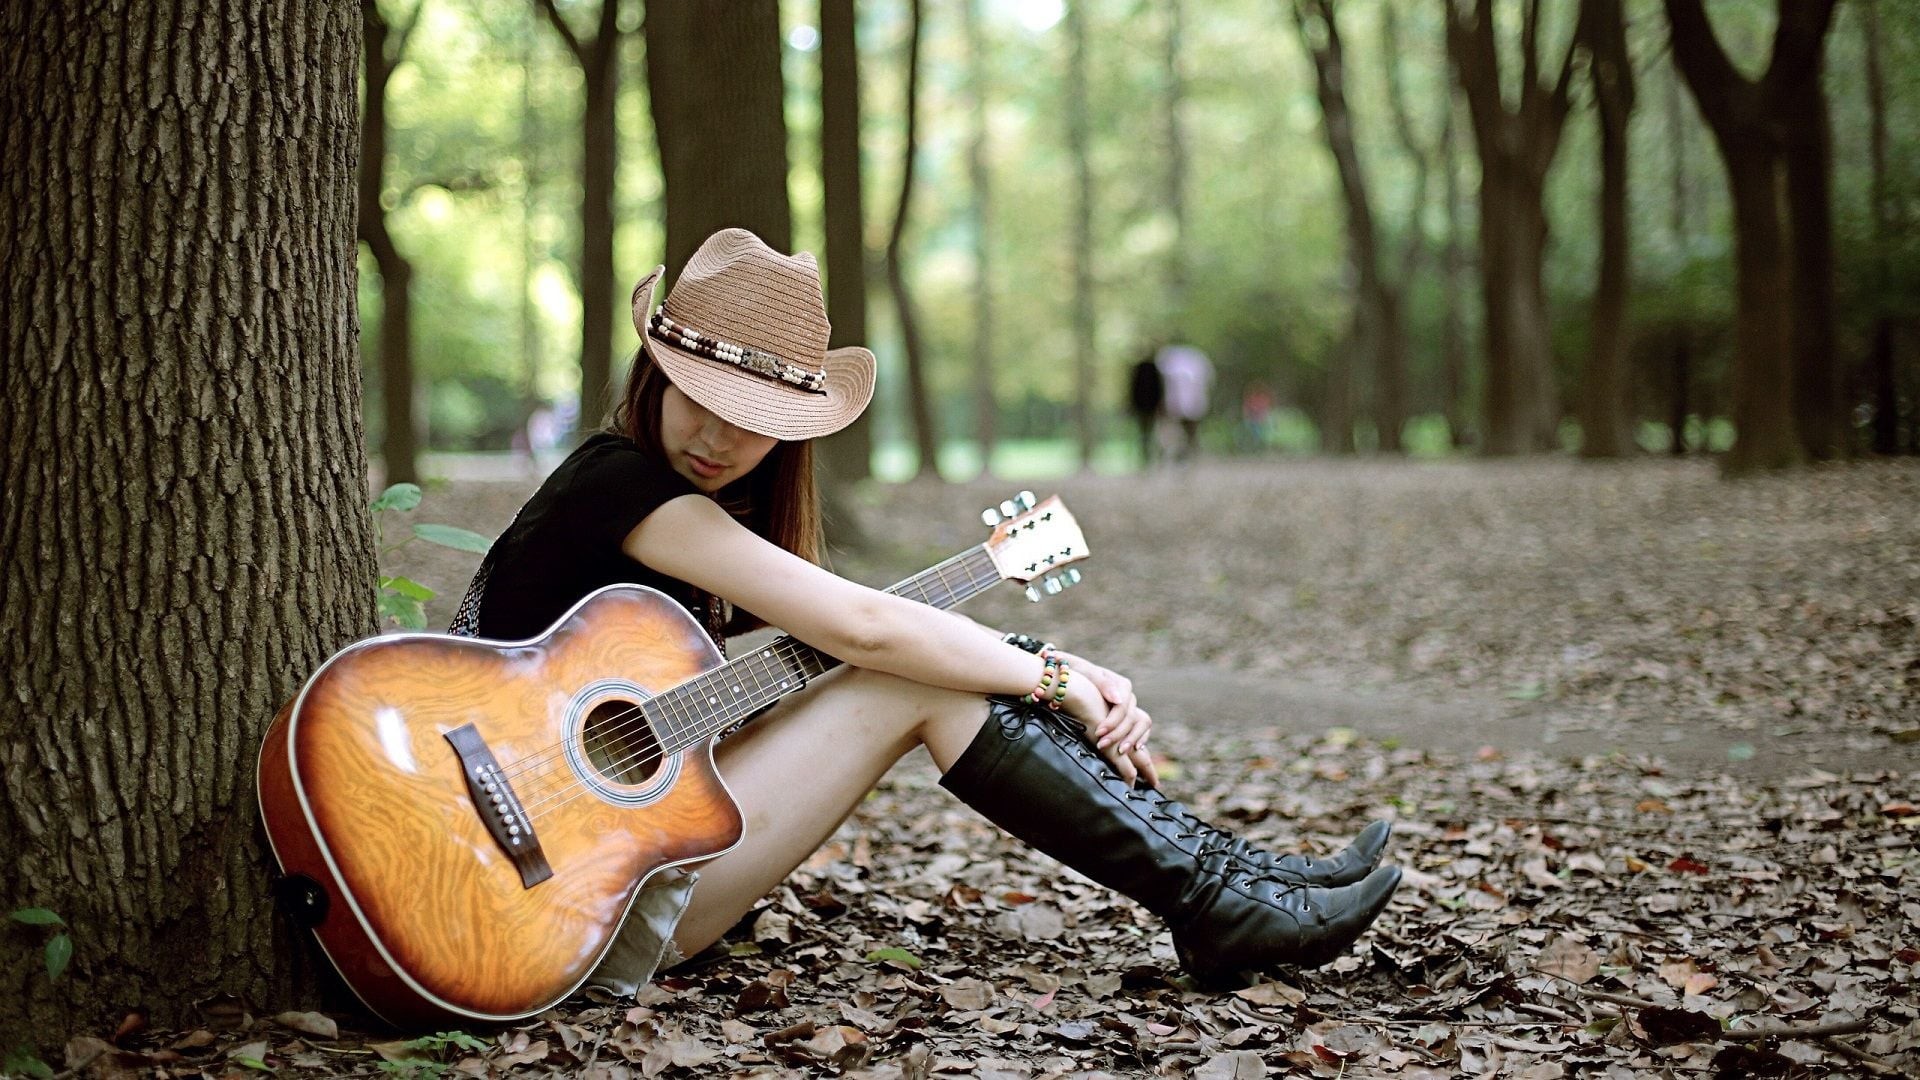 1920x1080 Pics of Girl with guitar